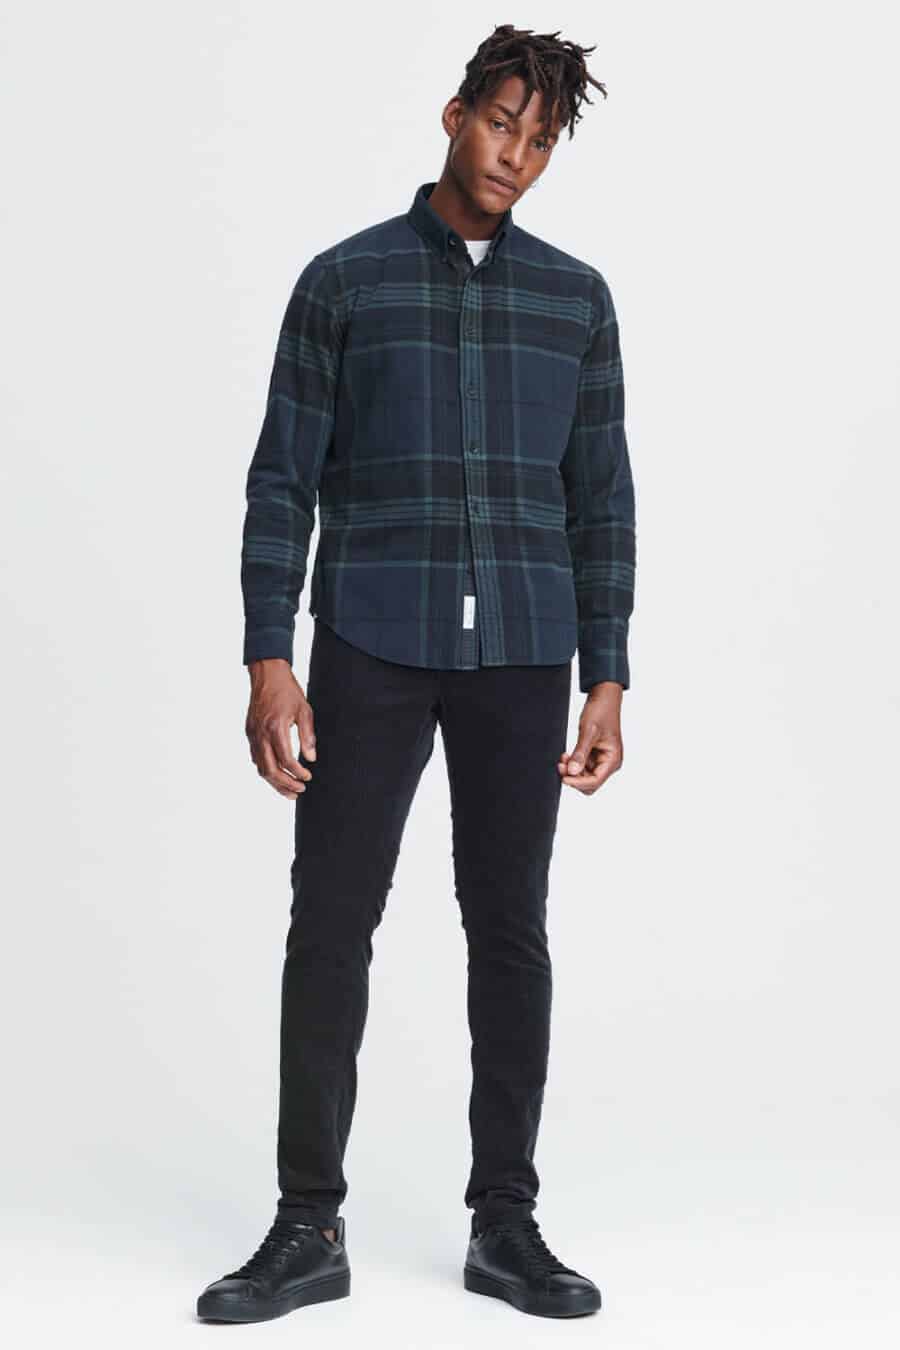 Men's black watch tartan flannel shirt with black jeans and sneakers